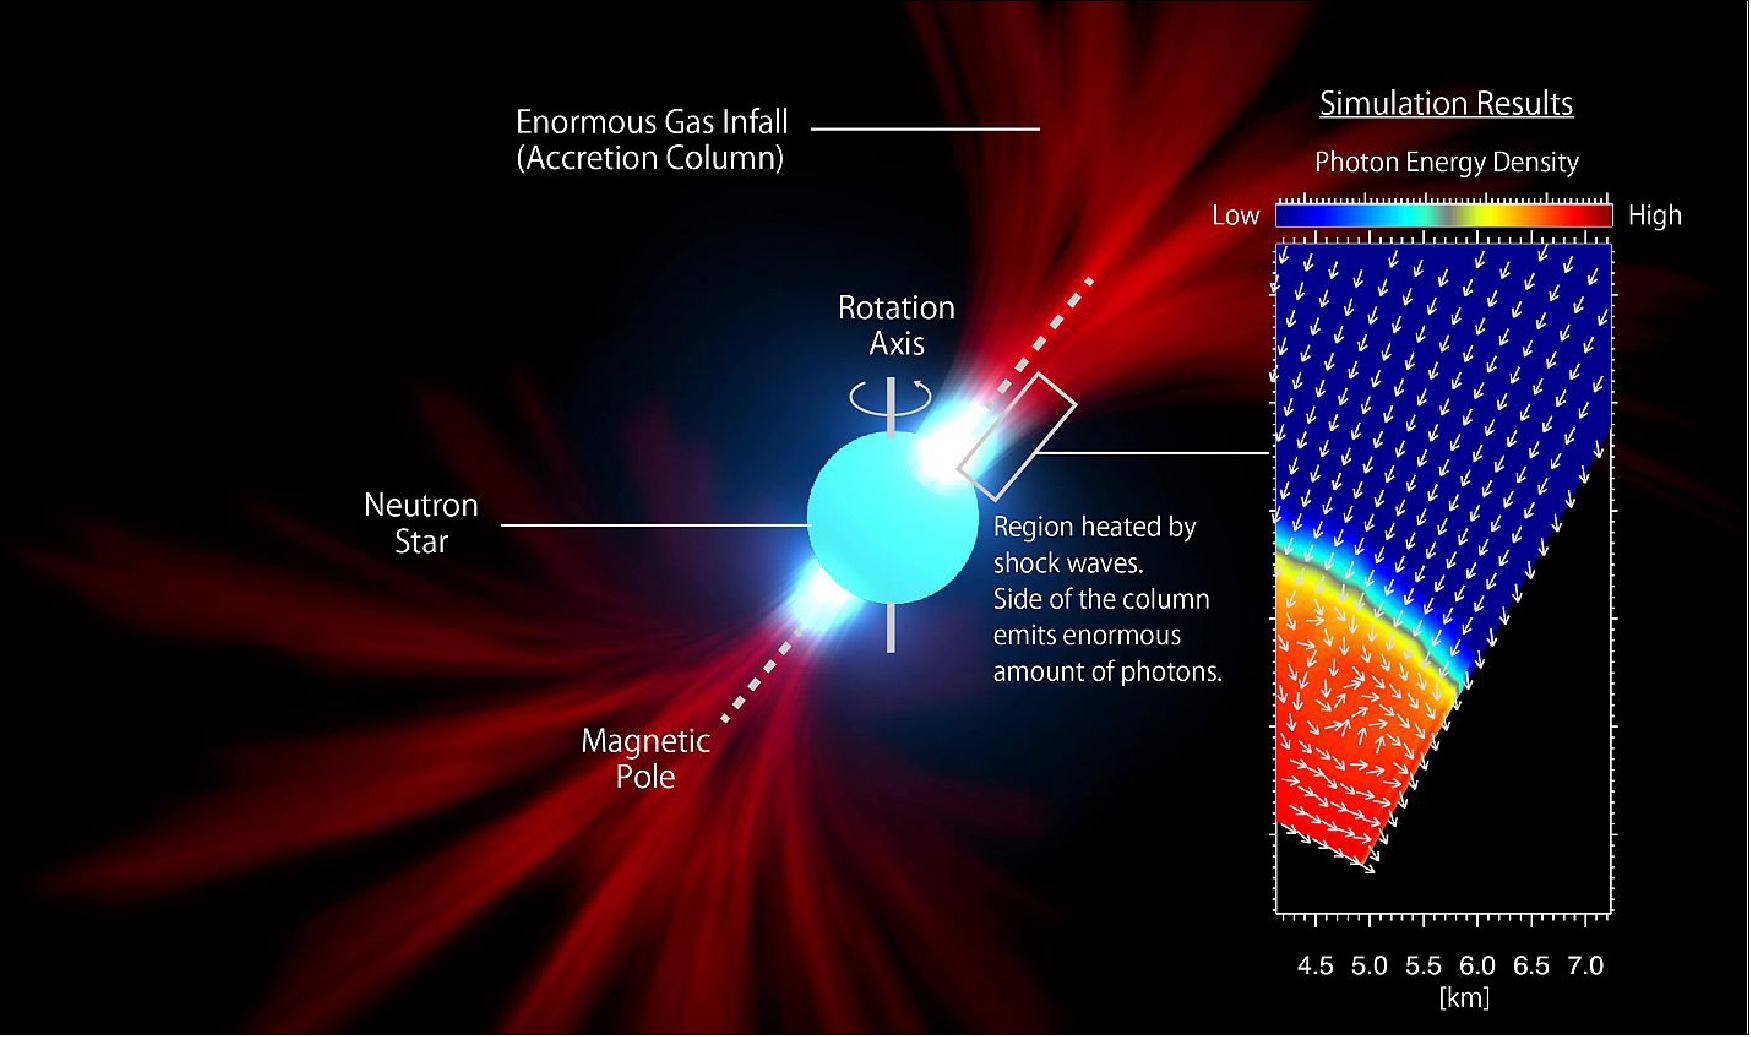 Figure 31: The new lighthouse model (a snapshot from Movie 1) and simulation results from the present research (inset on the right.) In the simulation results, the red indicates stronger radiation, and the arrows show the directions of photon flow. In this figure, many photons are produced near the surface of the neutron star and escape from the side of the accretion column. (image credit: NAOJ)